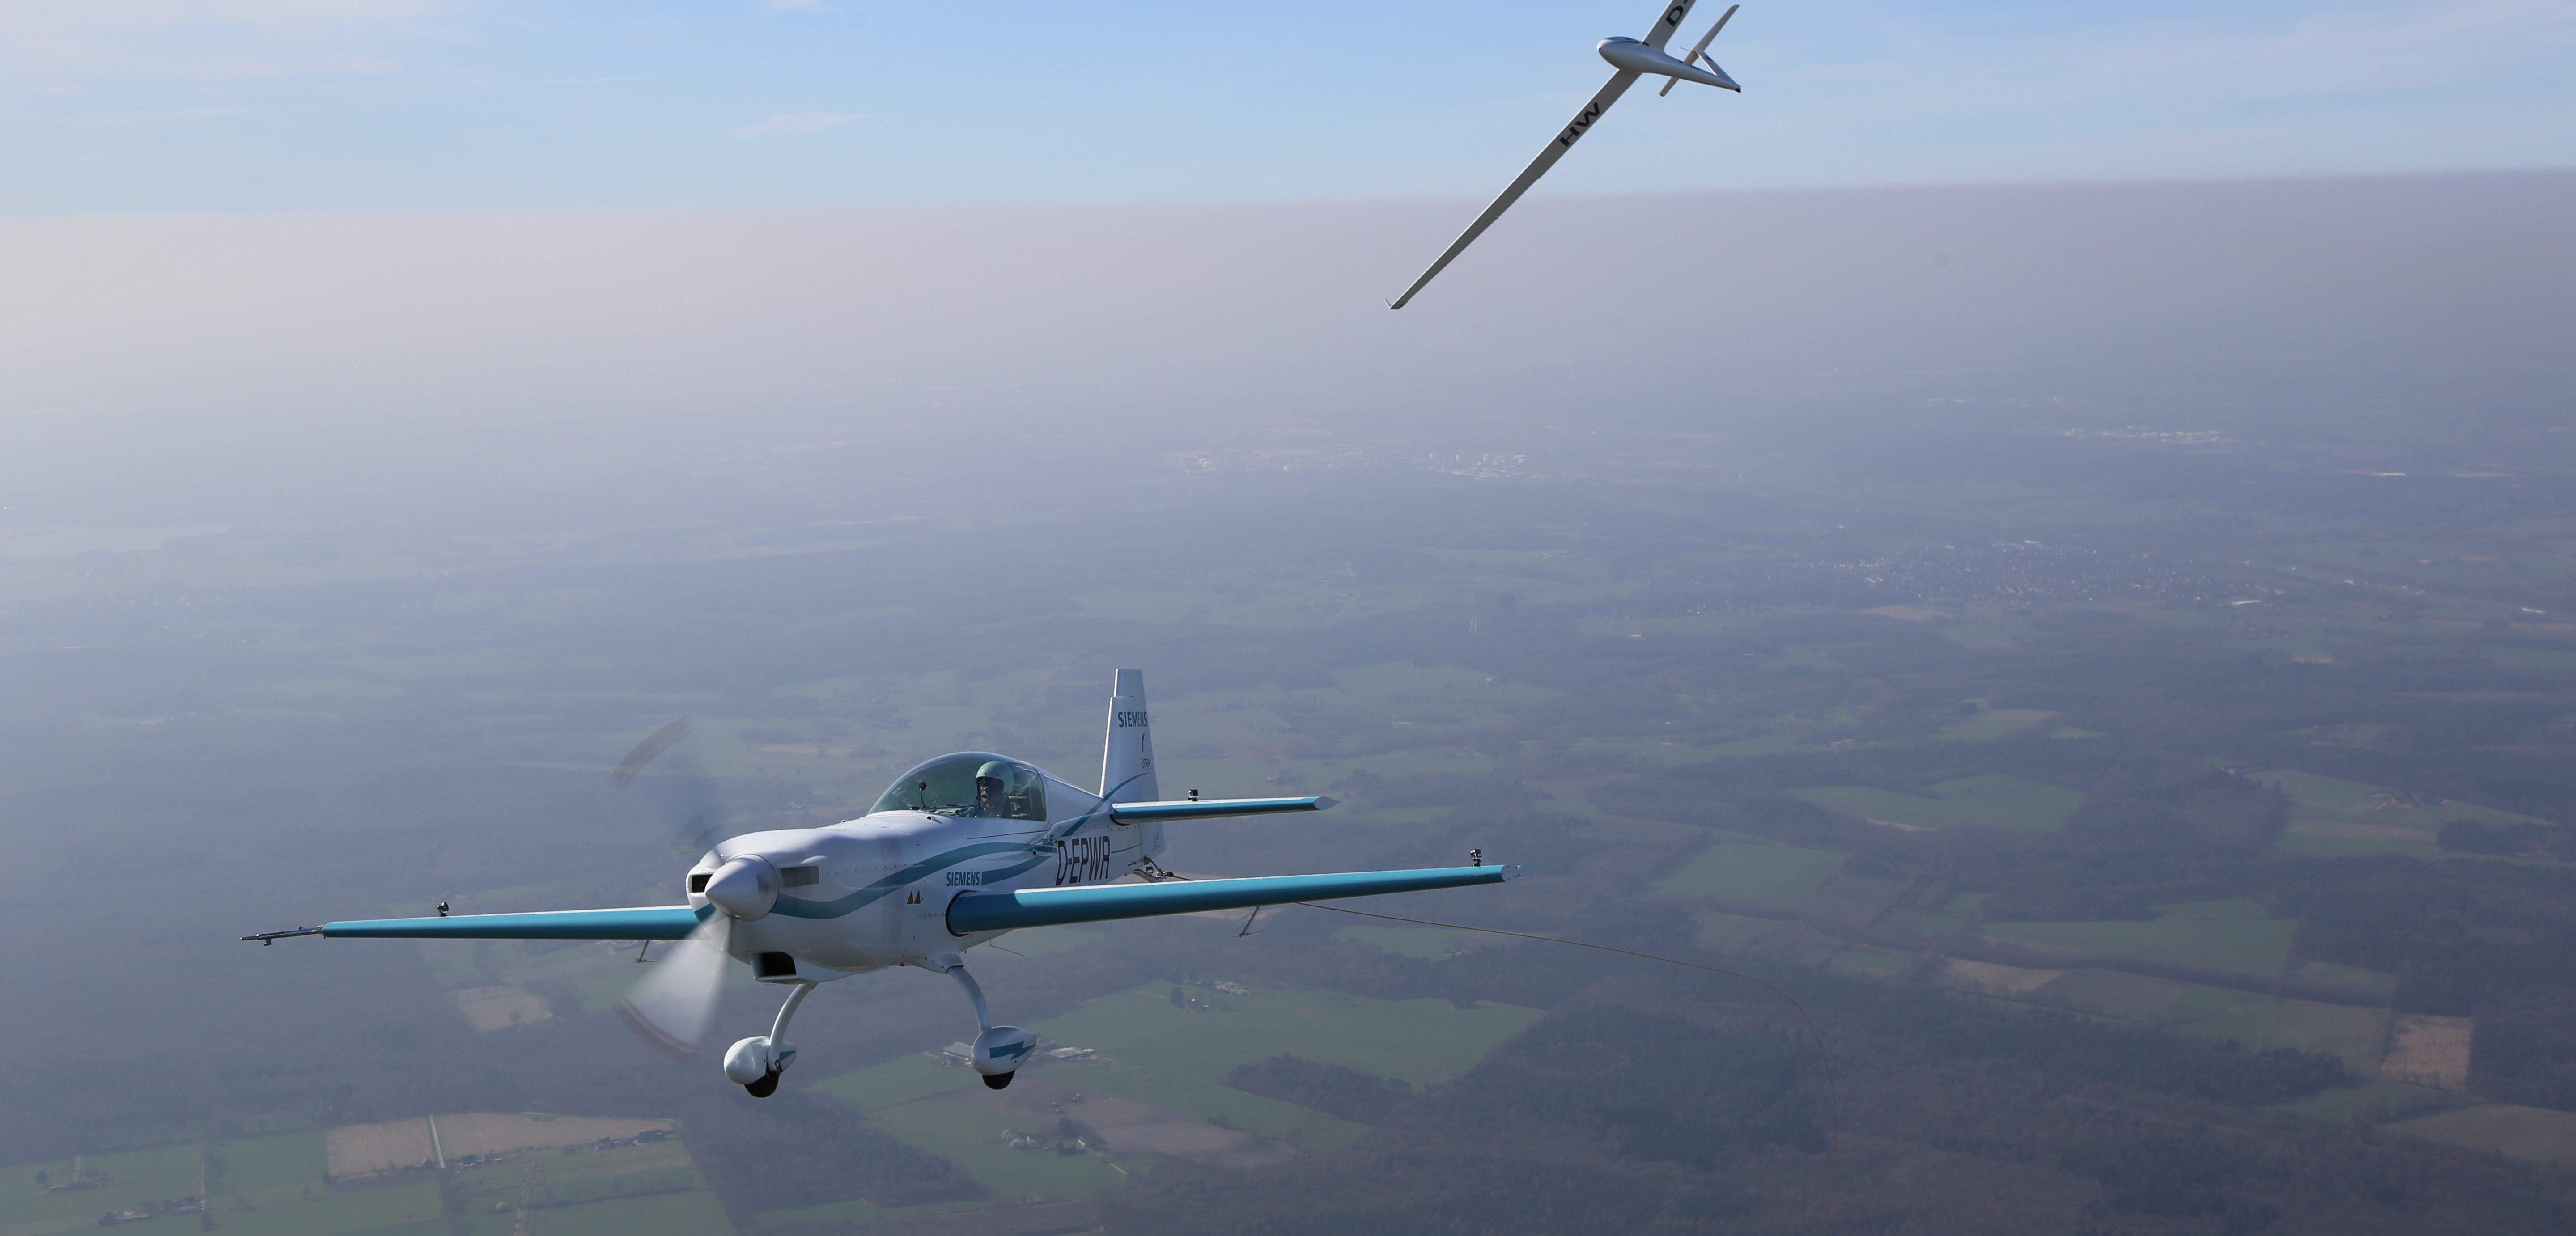 jazz Golf Petulance All-electric plane sets new records: top speed of 340 km/h (211 mph) and  first electric aerotow | Electrek